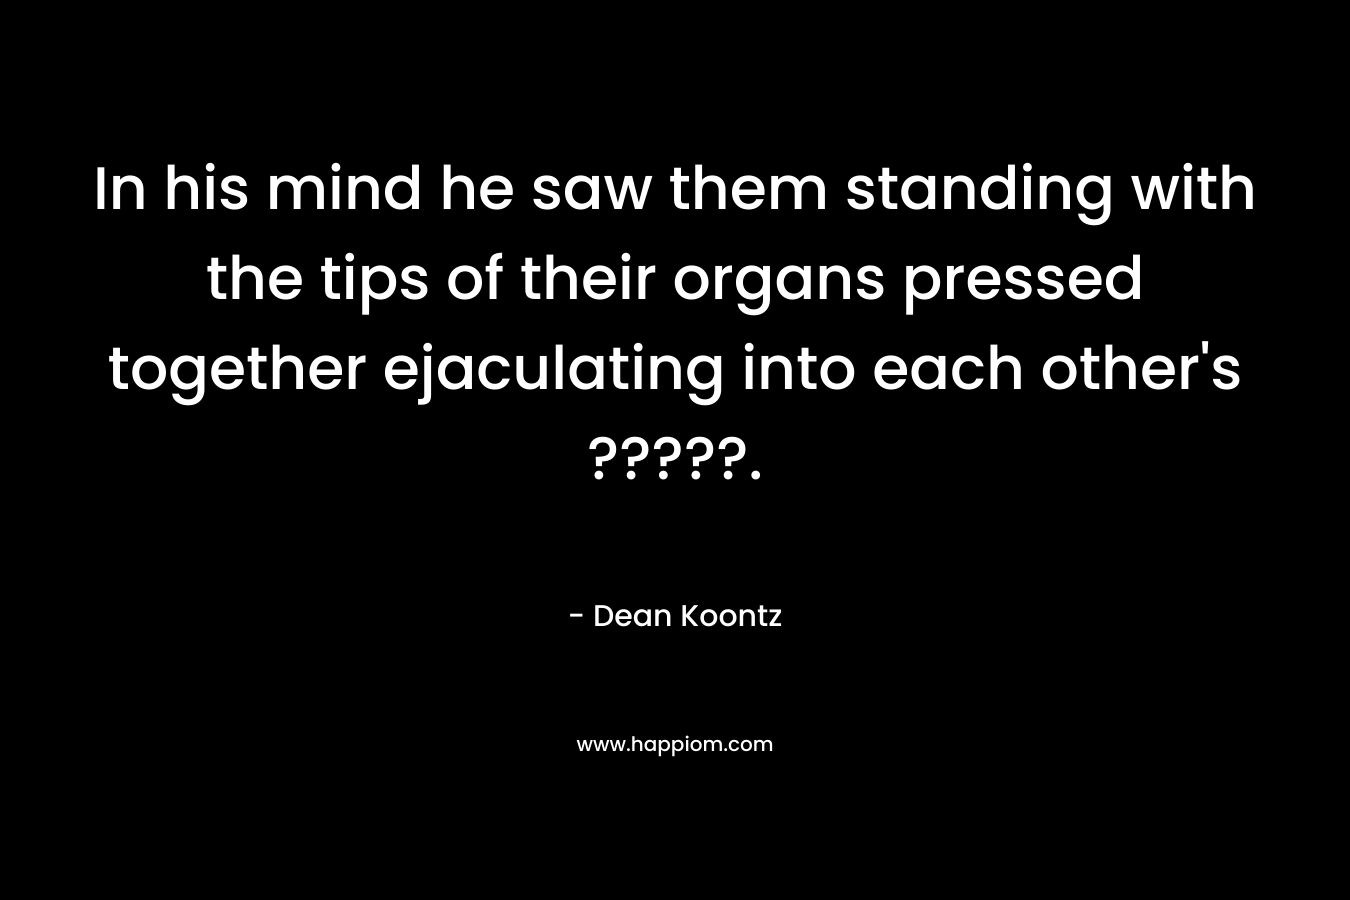 In his mind he saw them standing with the tips of their organs pressed together ejaculating into each other’s ?????. – Dean Koontz